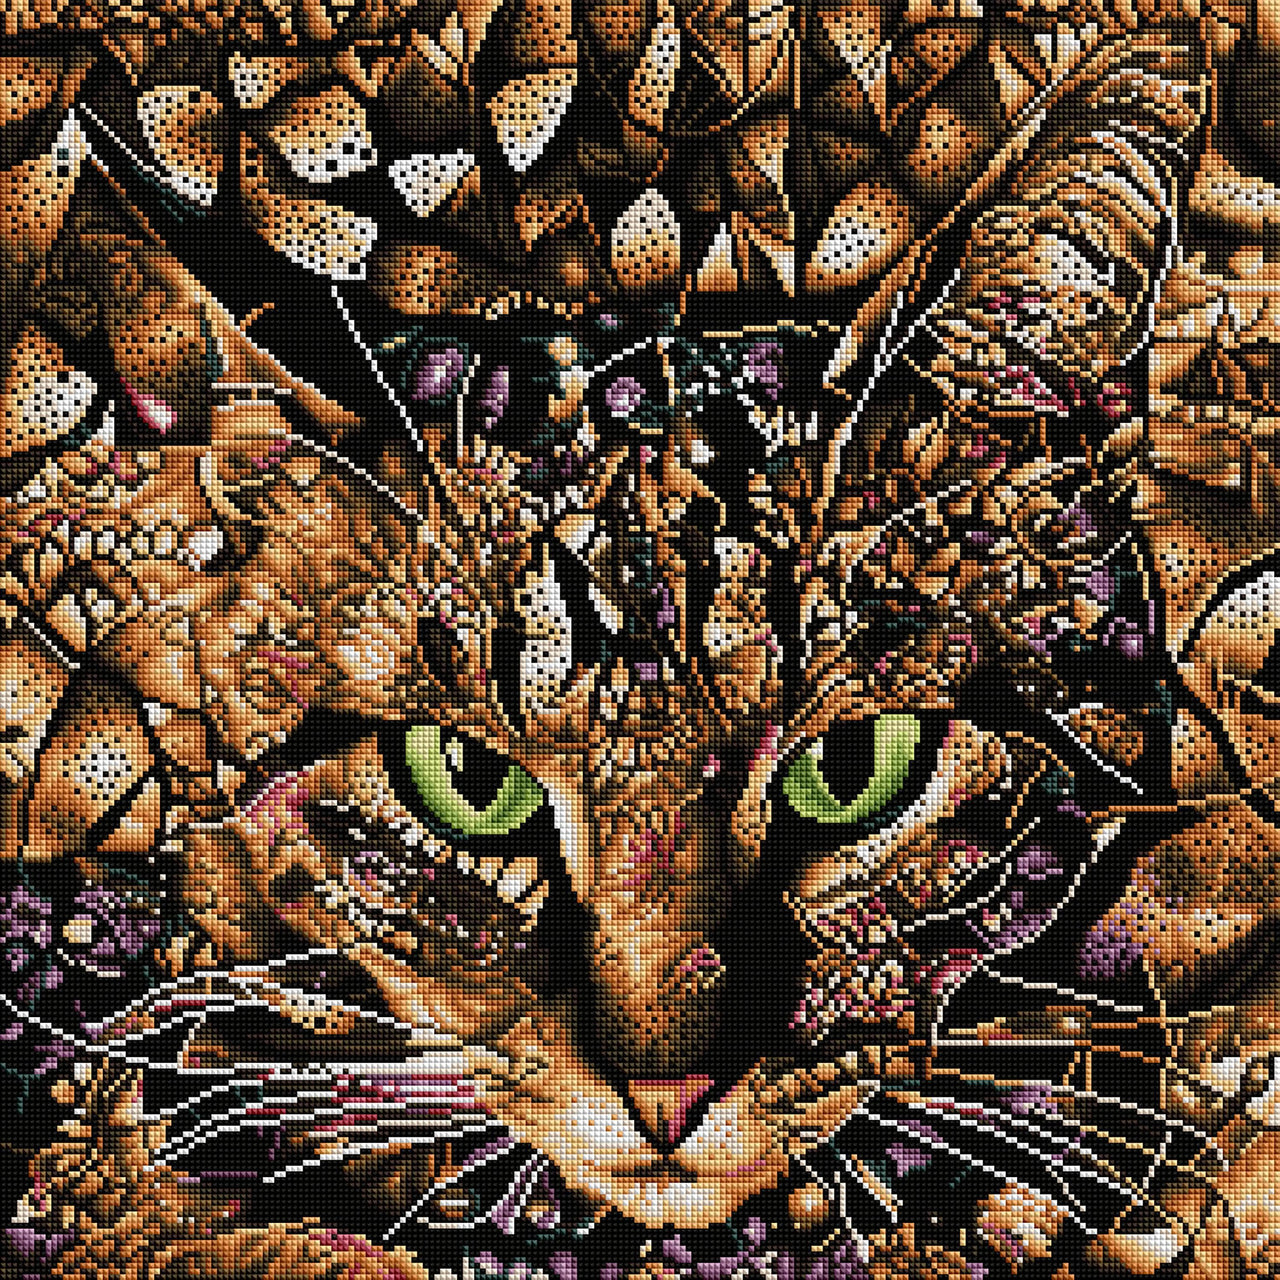 Diamond Painting Bud the Tabby Cat 22" x 22" (55.8cm x 55.8cm) / Square with 21 Colors including 2 ABs / 50,176